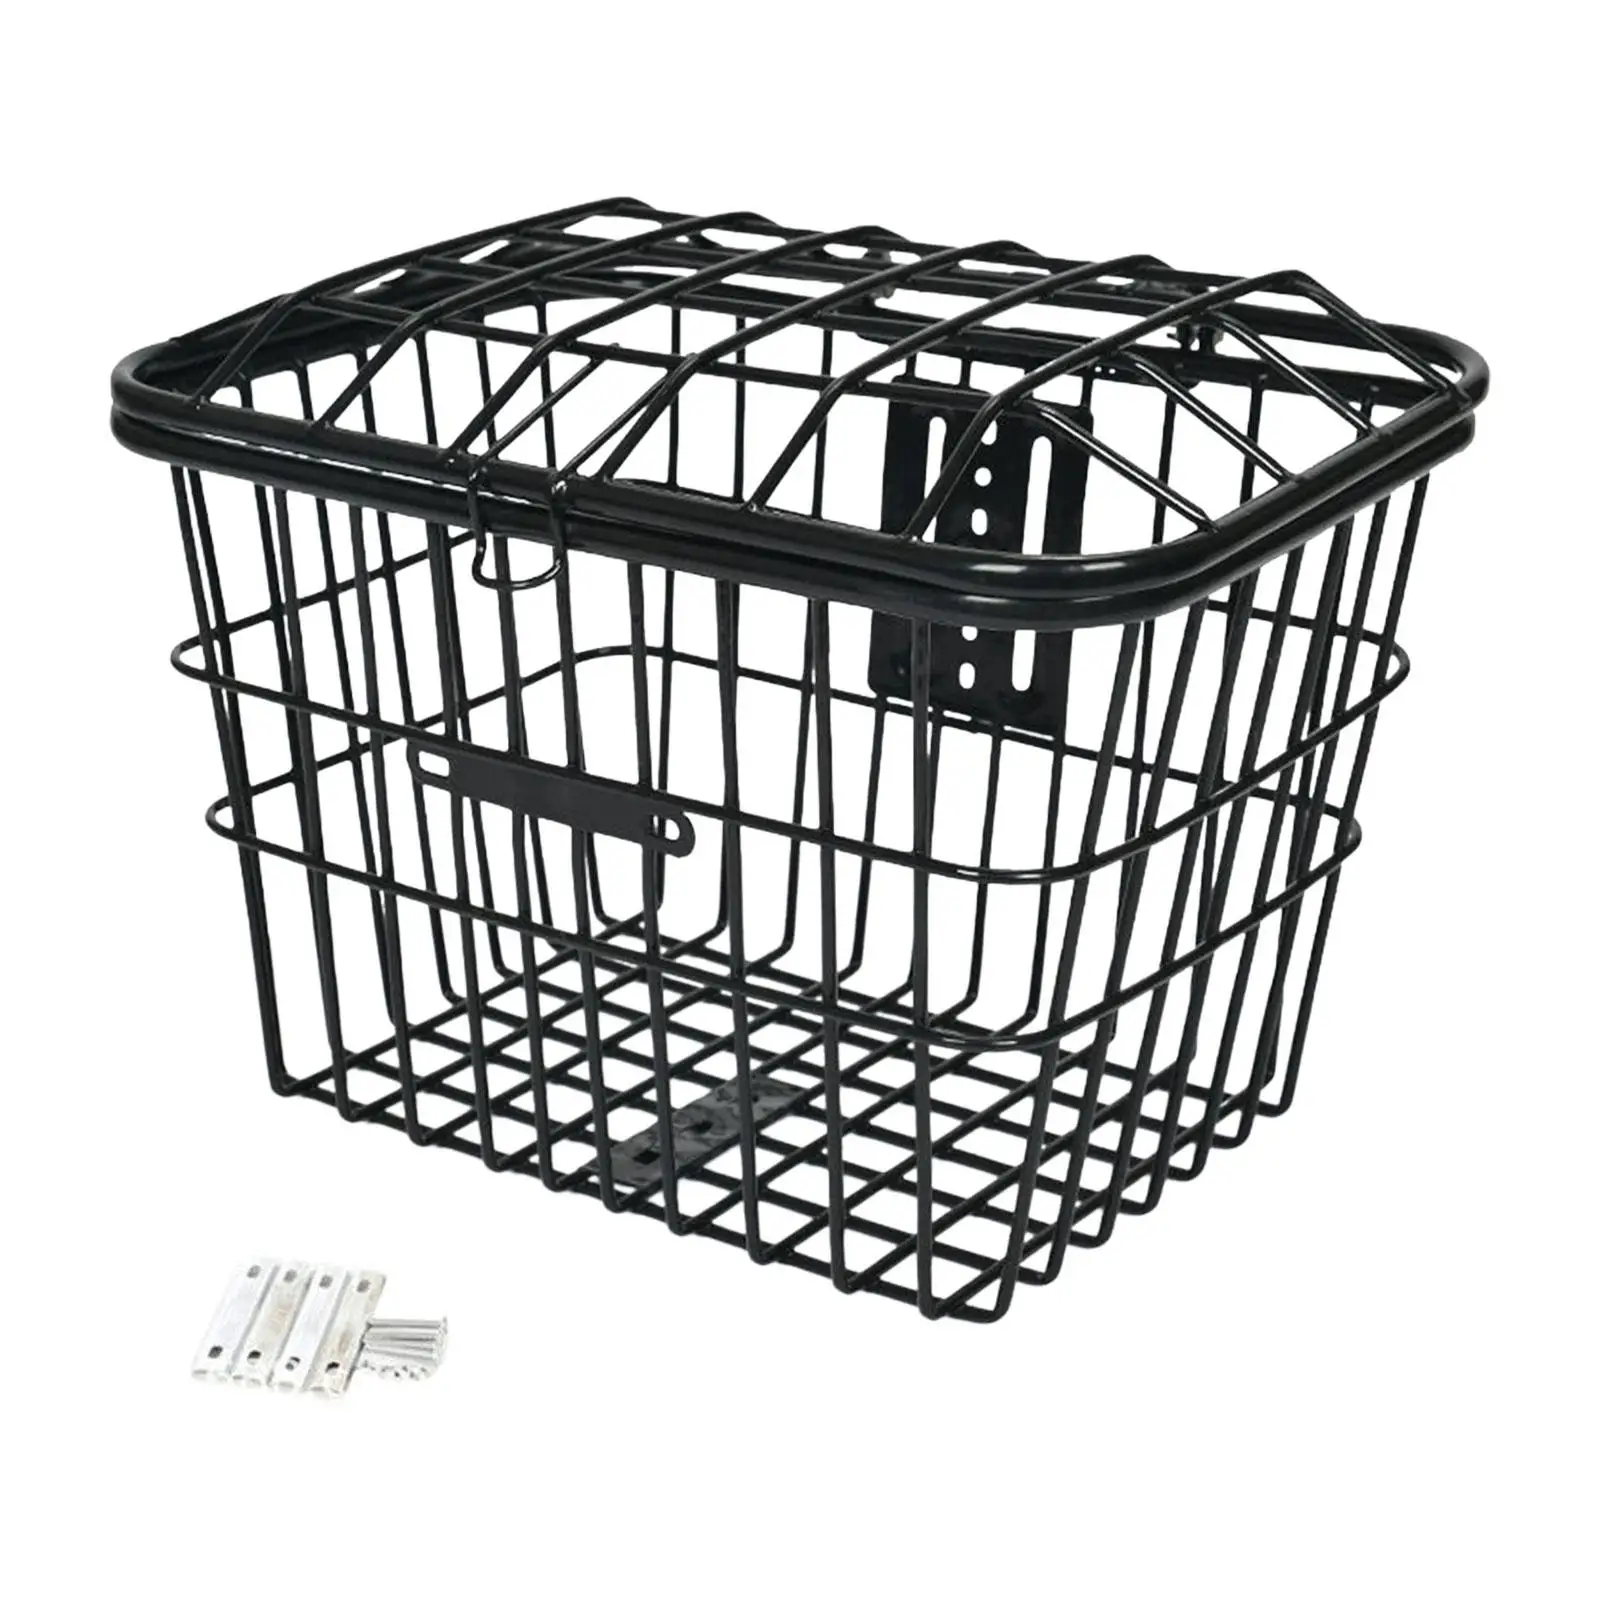 Bike Metal Mesh Front or Rear Basket with Lid Durable Weatherproof Accessories Strengthened Frame for Adult Women Men Bikes